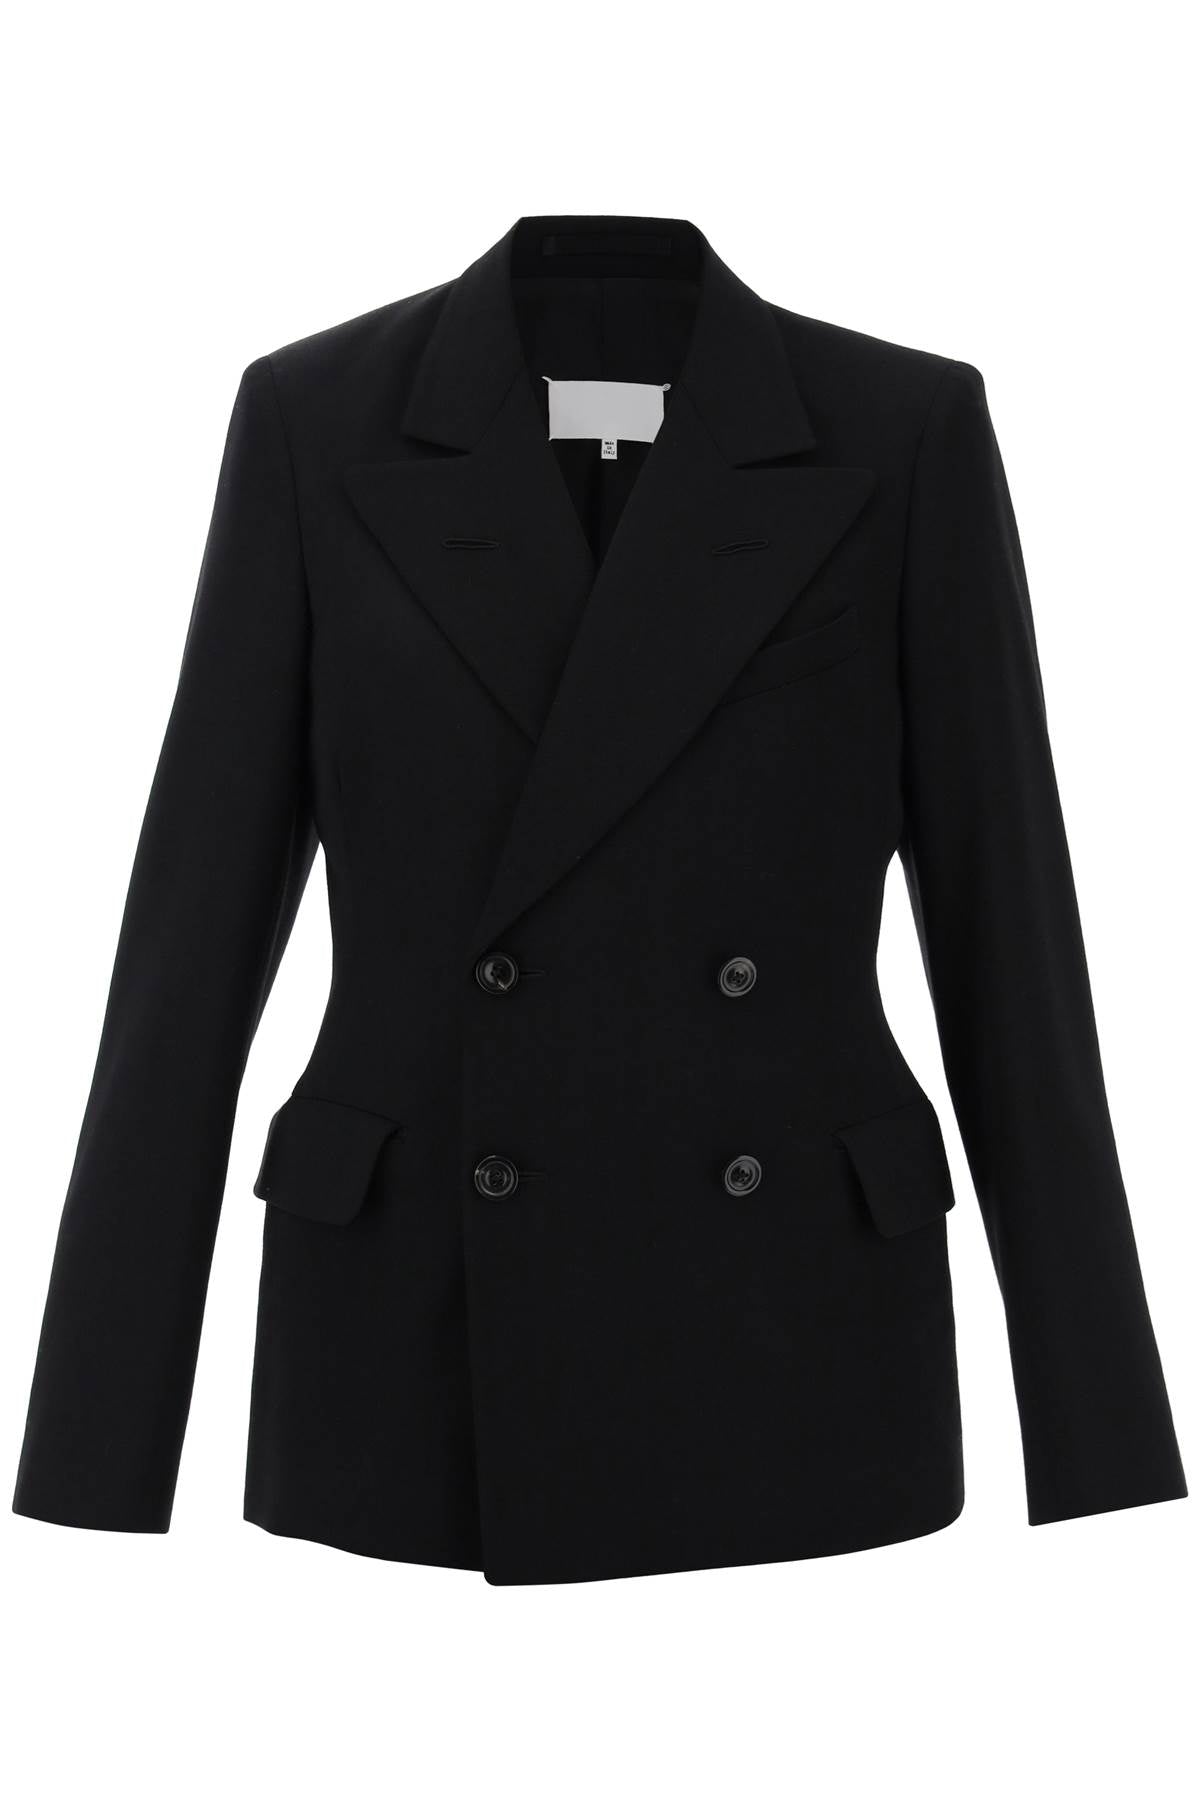 MAISON MARGIELA SLIM-FIT WOOL JACKET WITH A FITTED WAIST